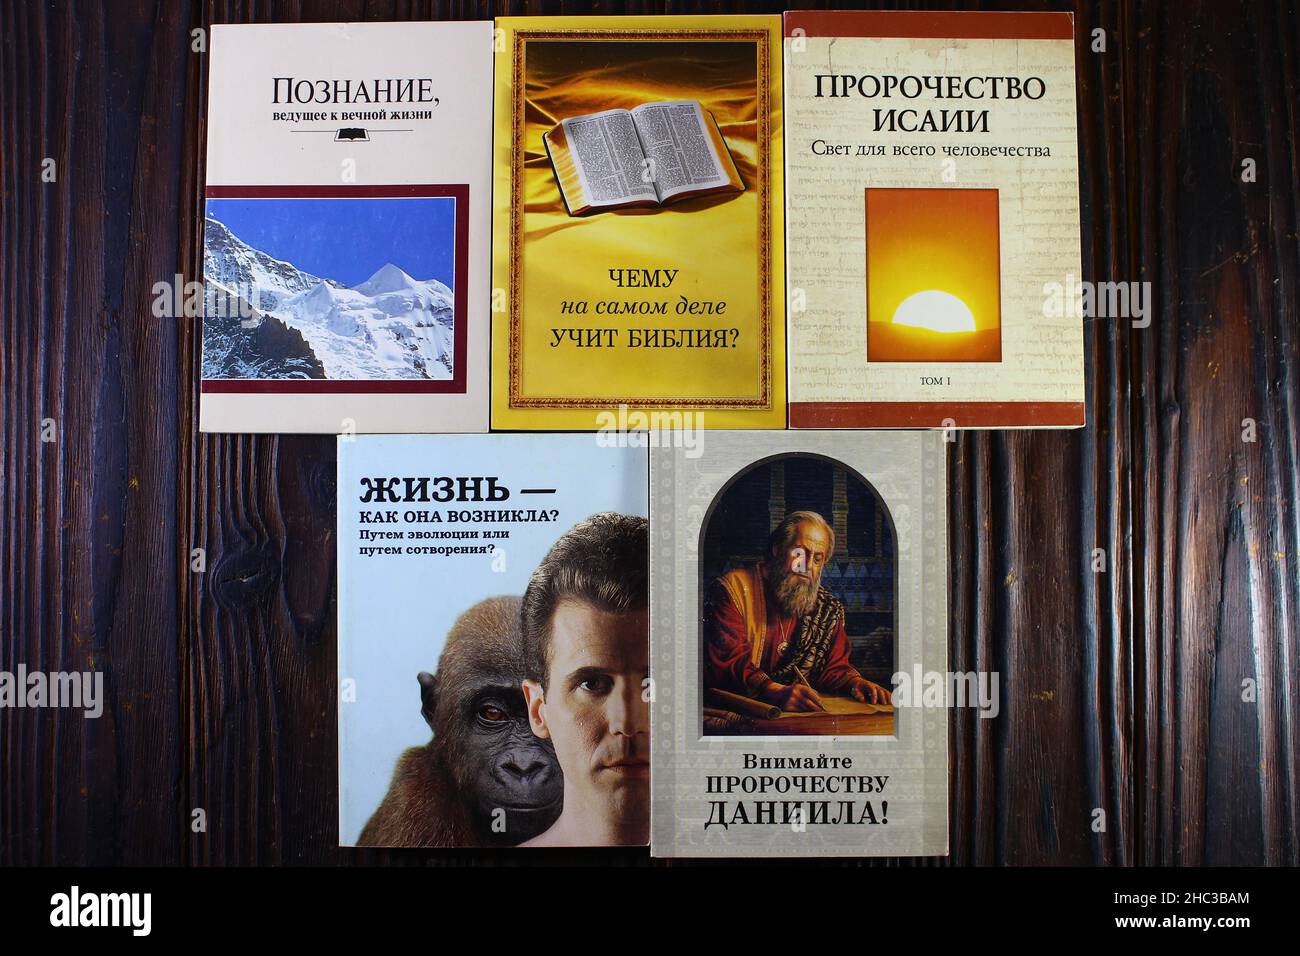 Russia - December 2020: Religious literature of Jehovah's Witnesses (organization banned in Russia). Books of the early 2000s in Russian Stock Photo